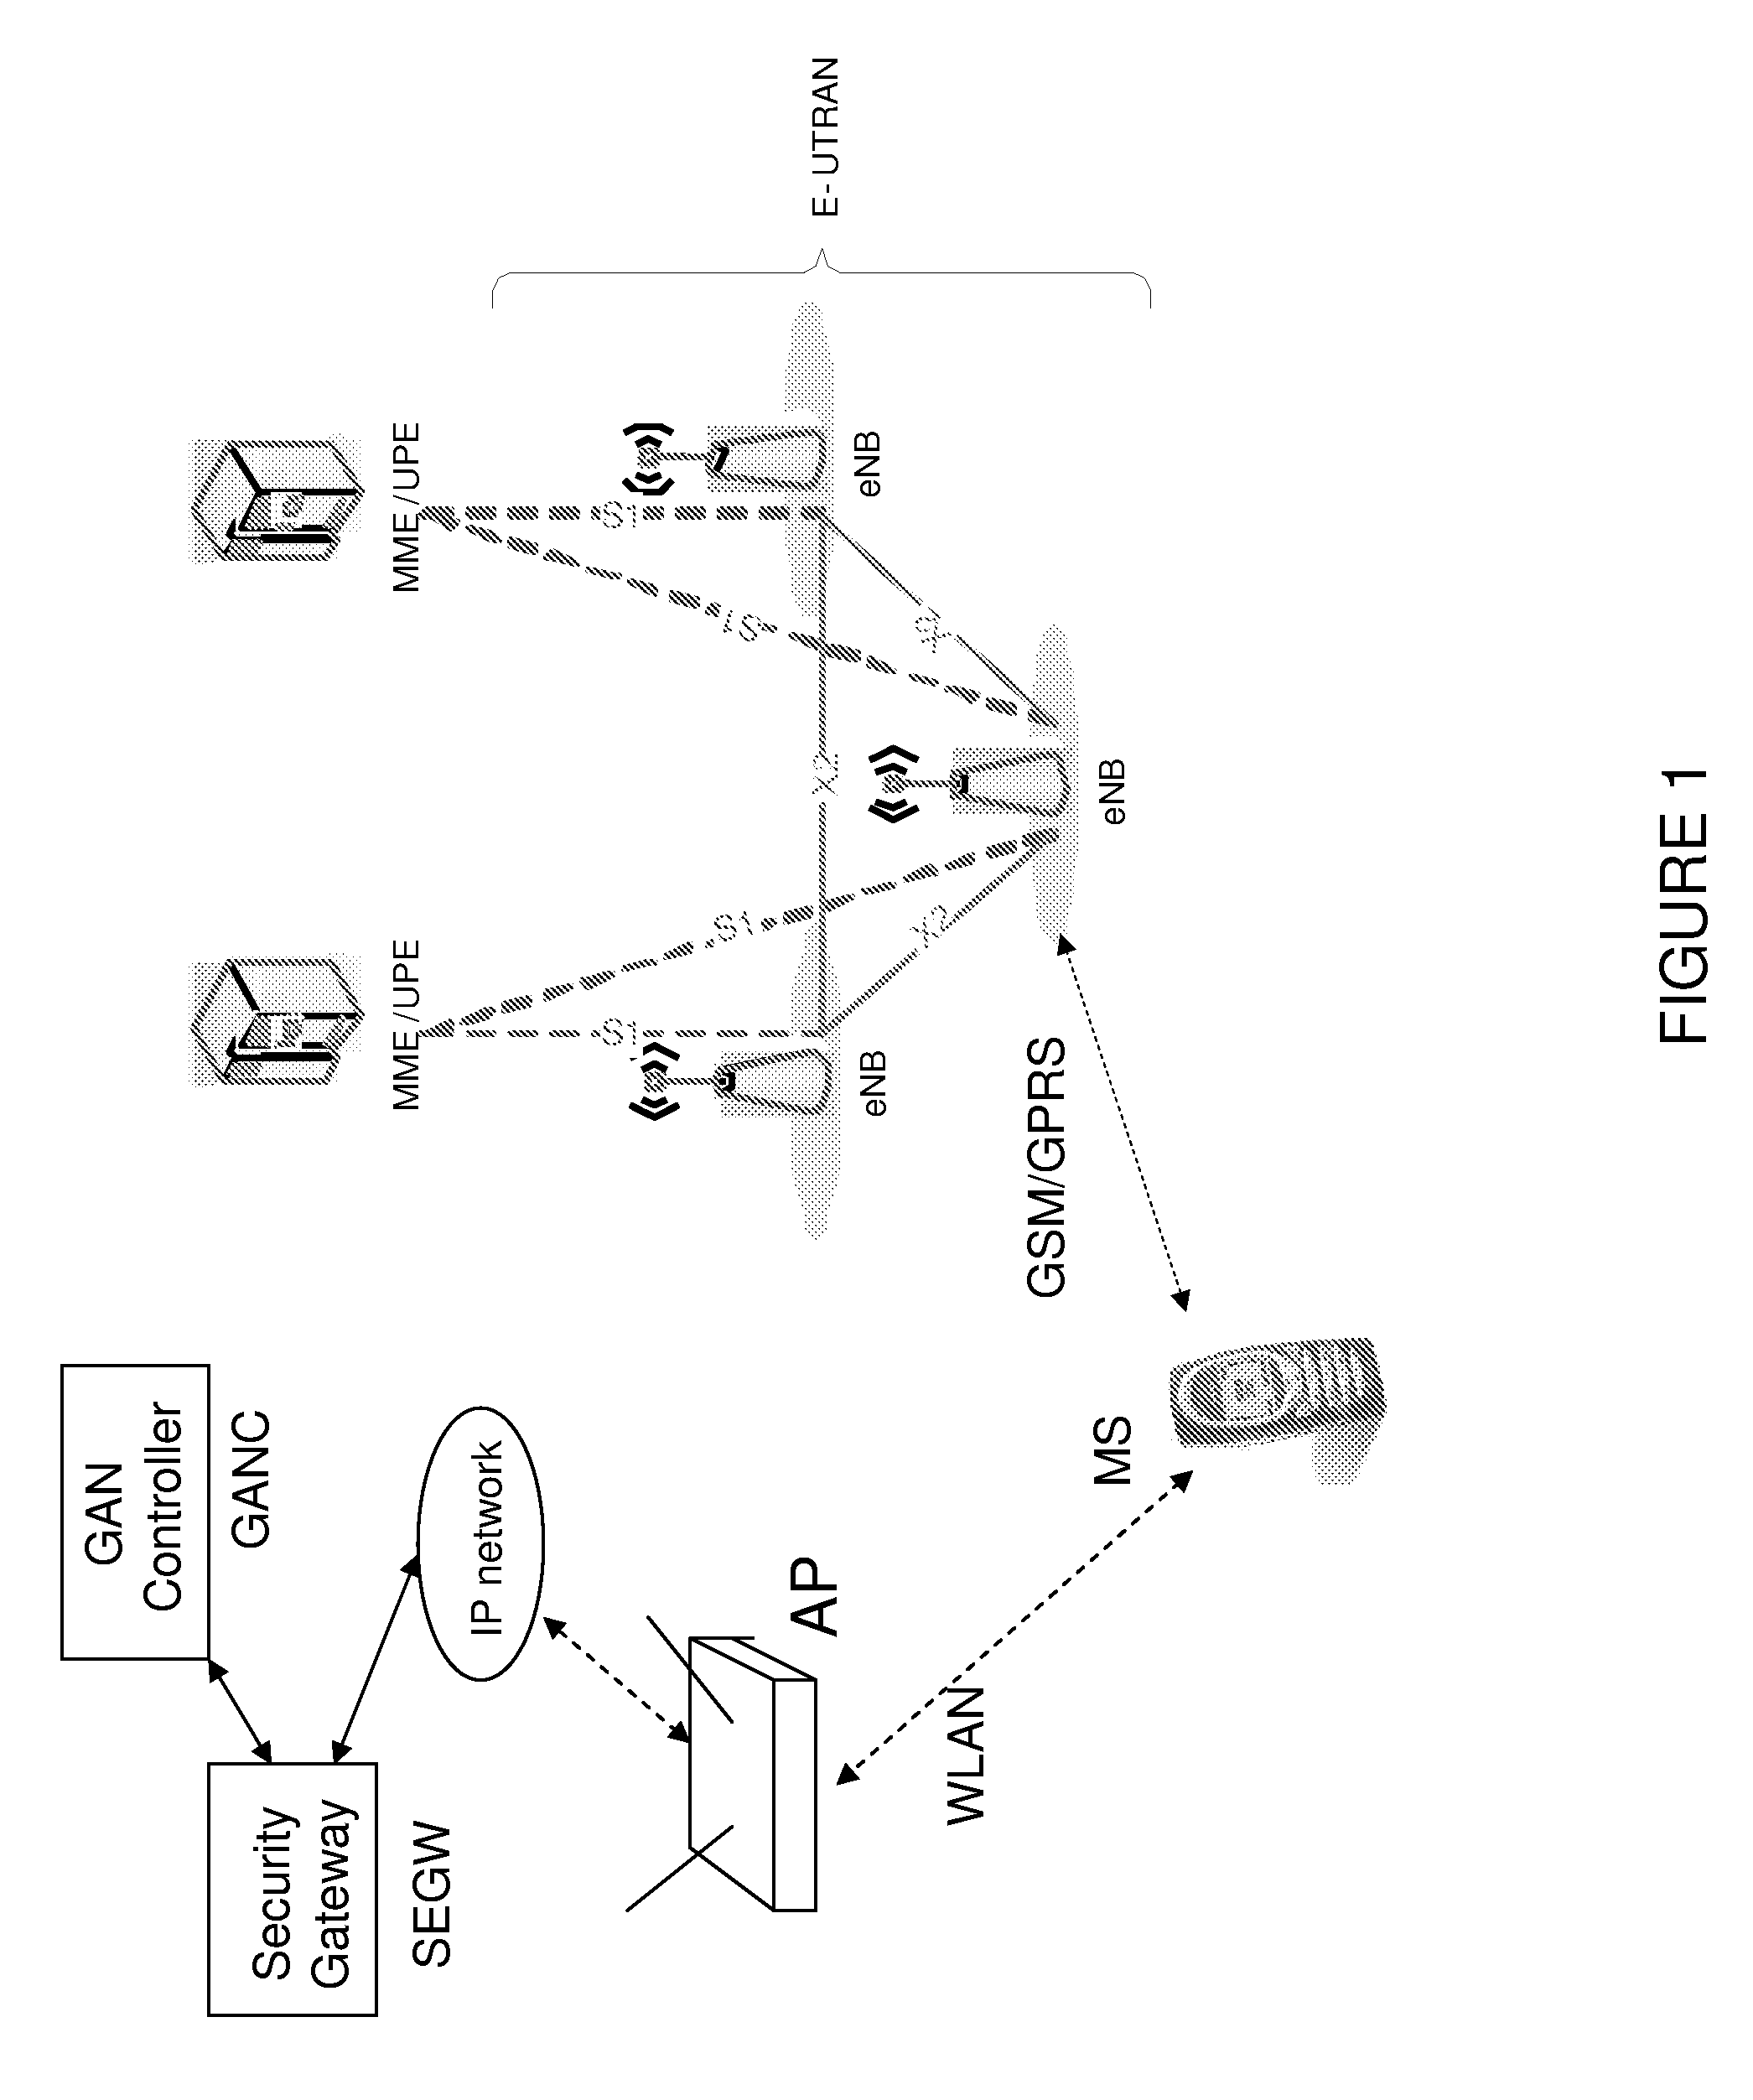 System and method for generic access network registration by a mobile station during network congestion